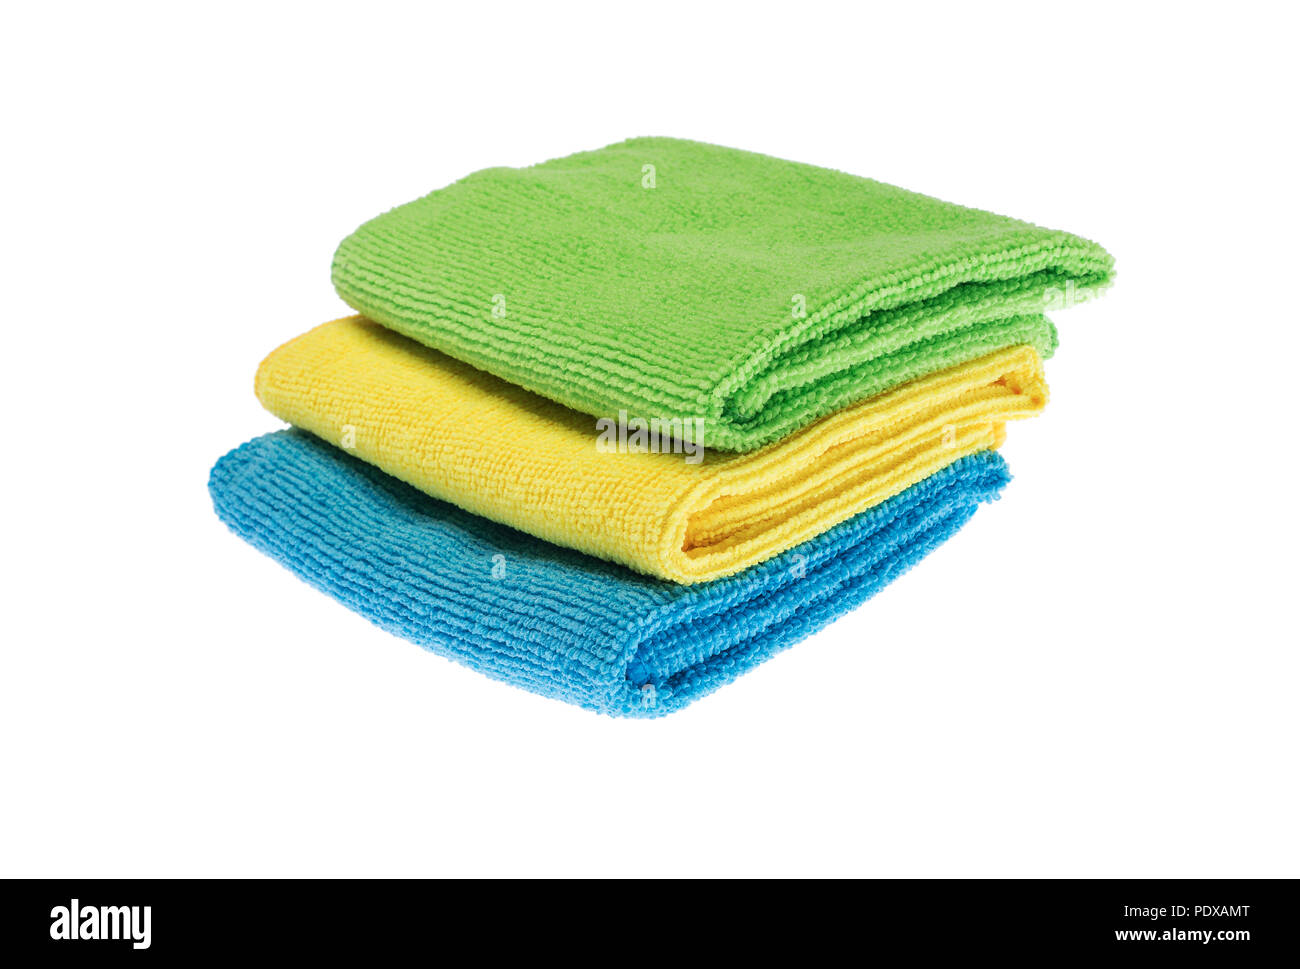 https://c8.alamy.com/comp/PDXAMT/terry-towels-for-cleaning-you-can-see-the-texture-of-the-fabric-PDXAMT.jpg